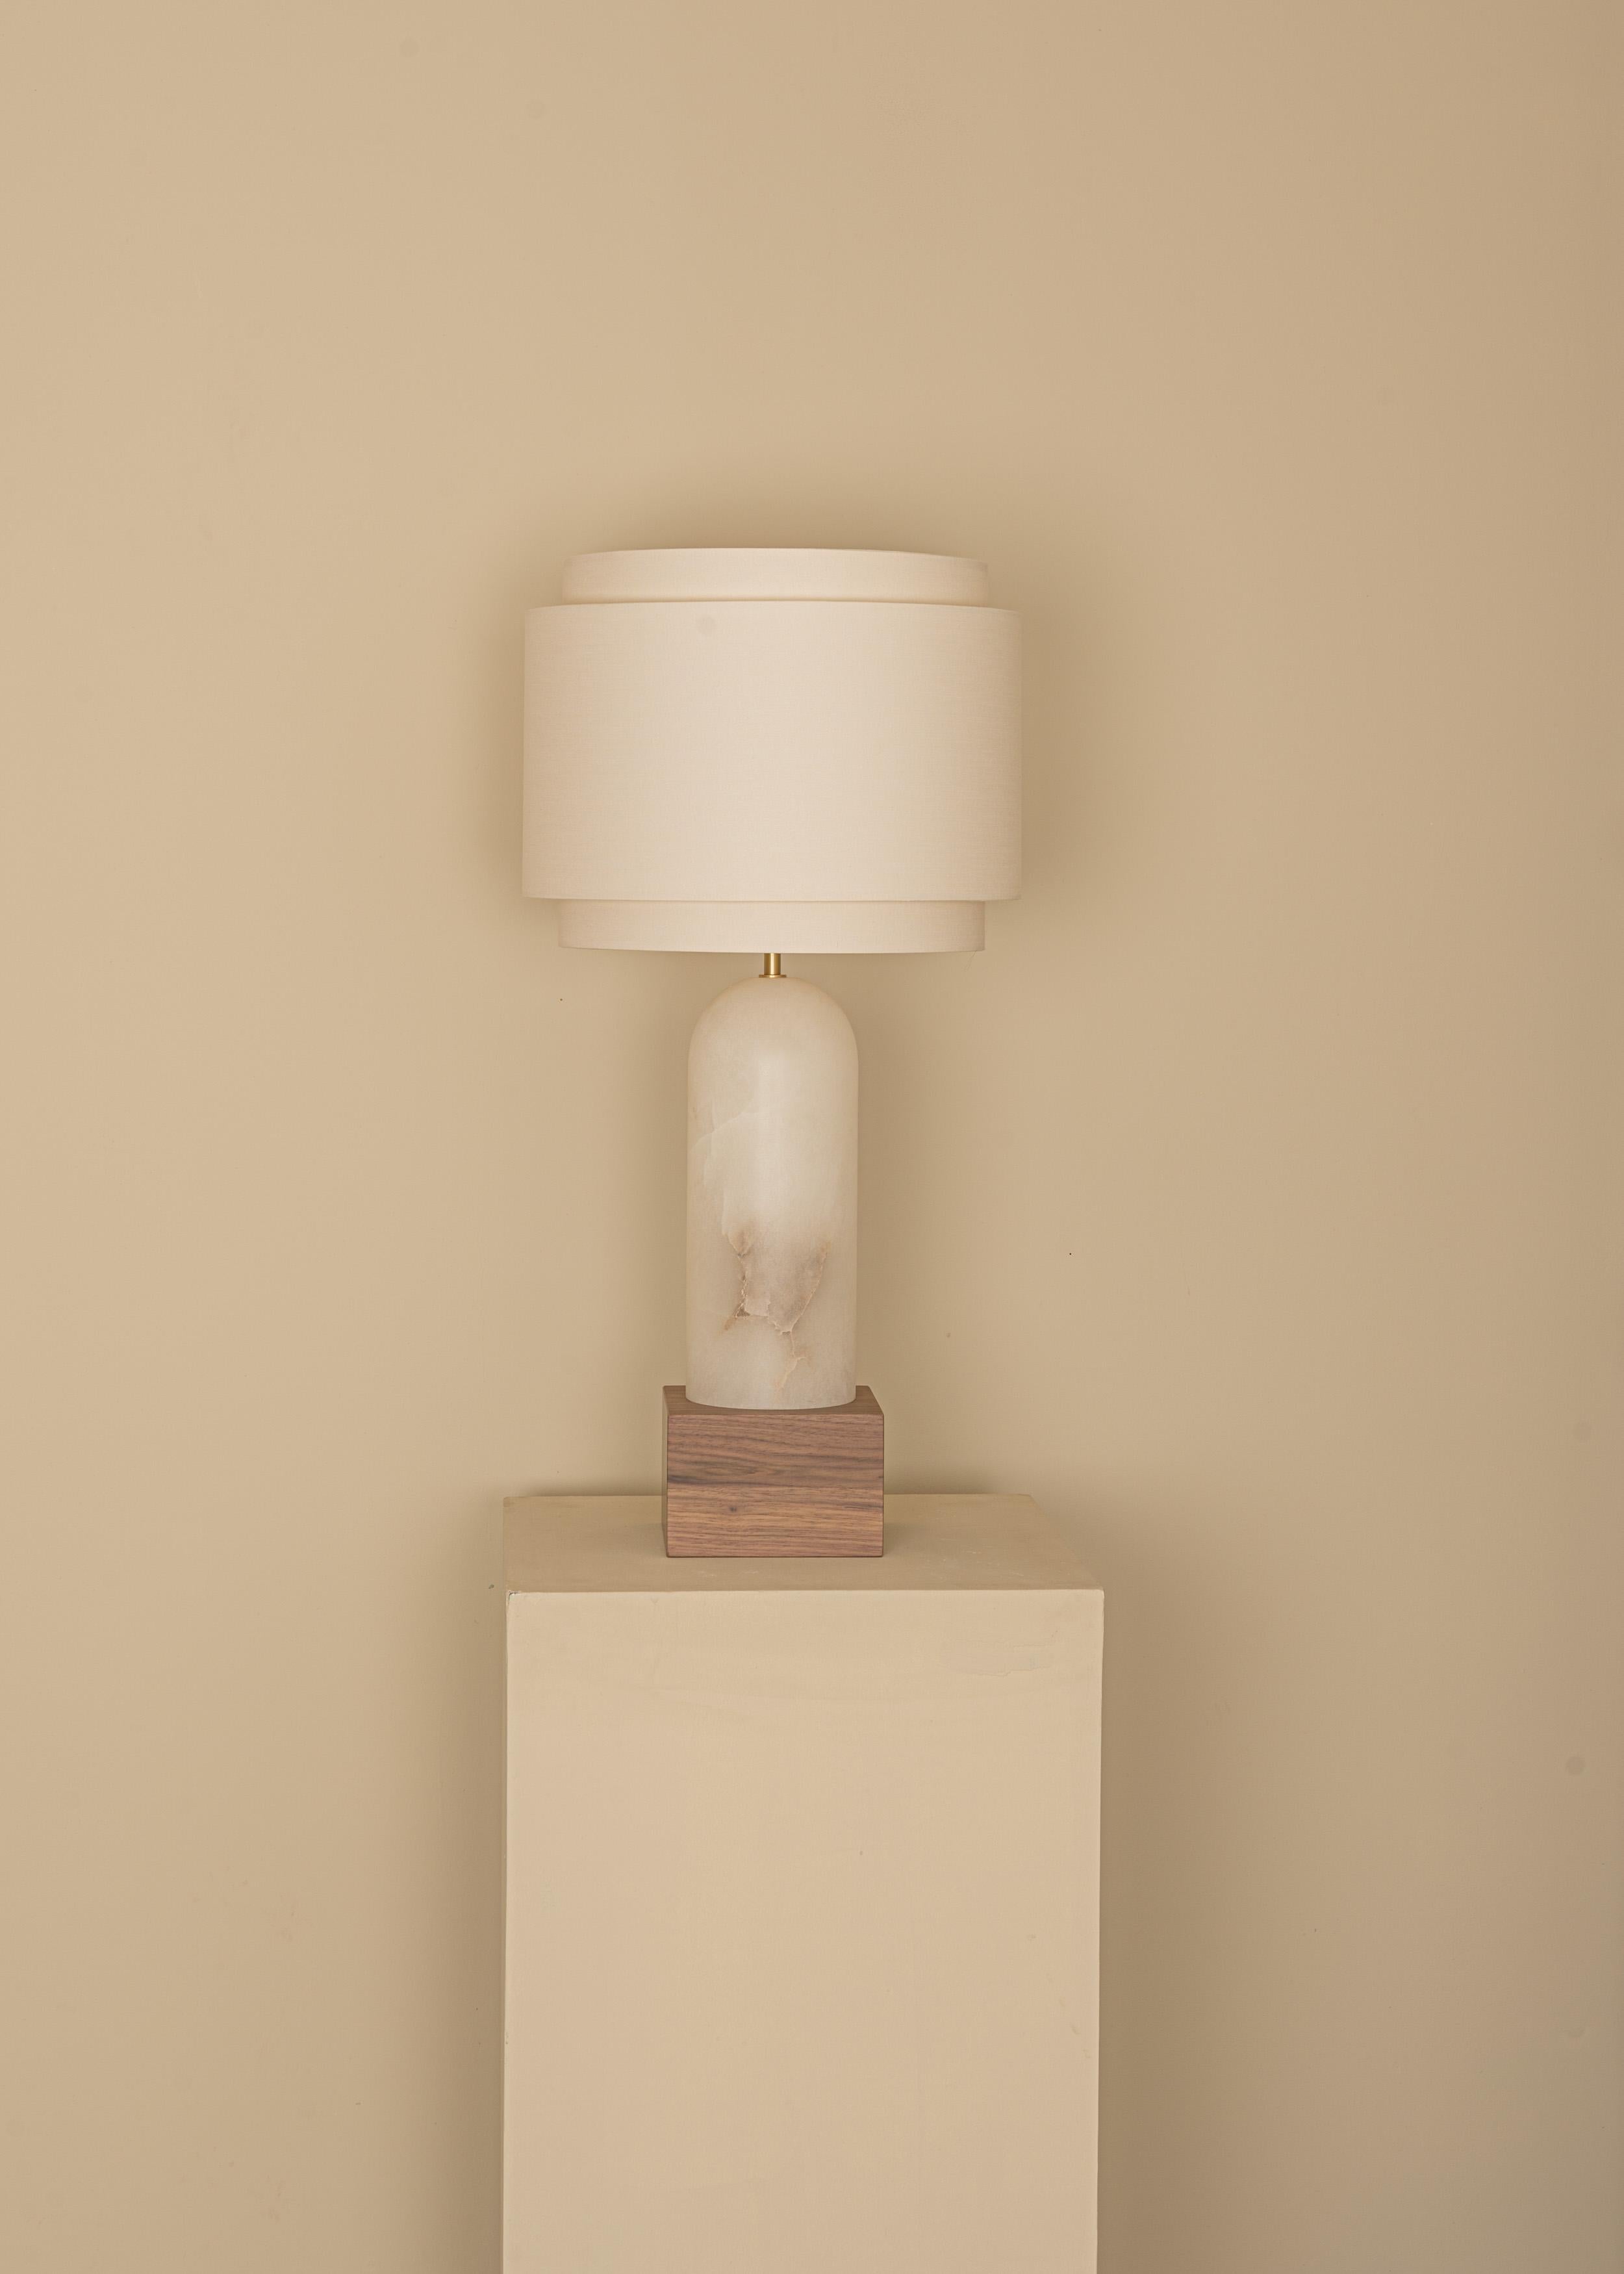 White Alabaster And Walnut Base Pura Kelo Double Table Lamp by Simone & Marcel
Dimensions: D 35 x W 35 x H 69 cm.
Materials: Brass, cotton, walnut and white alabaster.

Also available in different marble, wood and alabaster options and finishes.